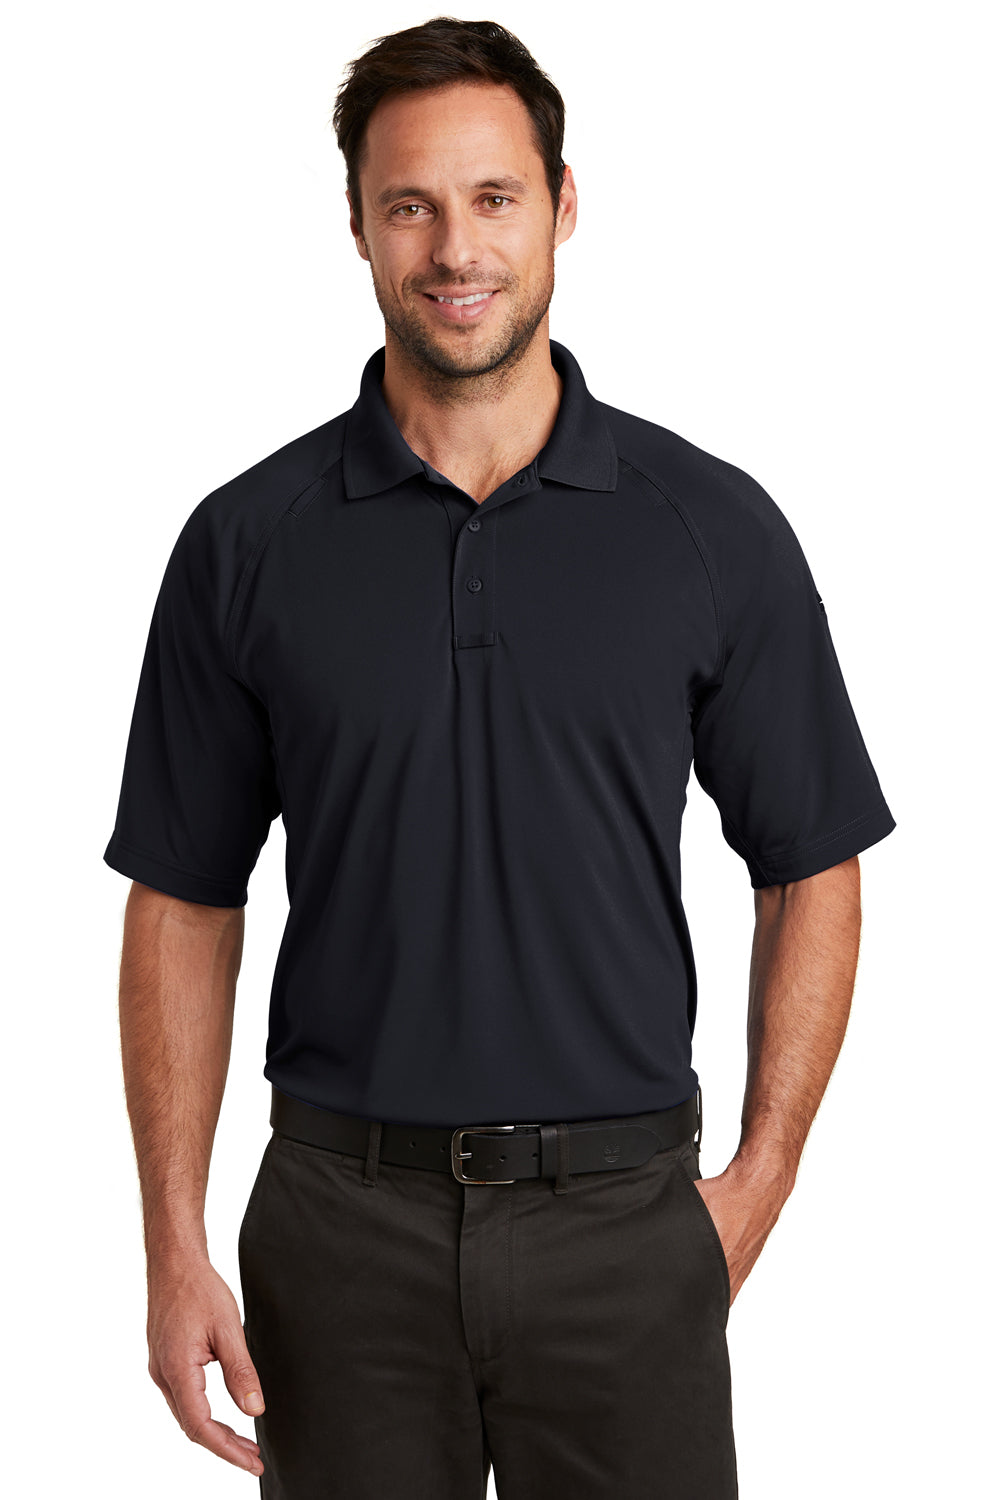 CornerStone CS420 Mens Select Tactical Moisture Wicking Short Sleeve Polo Shirt Navy Blue Front